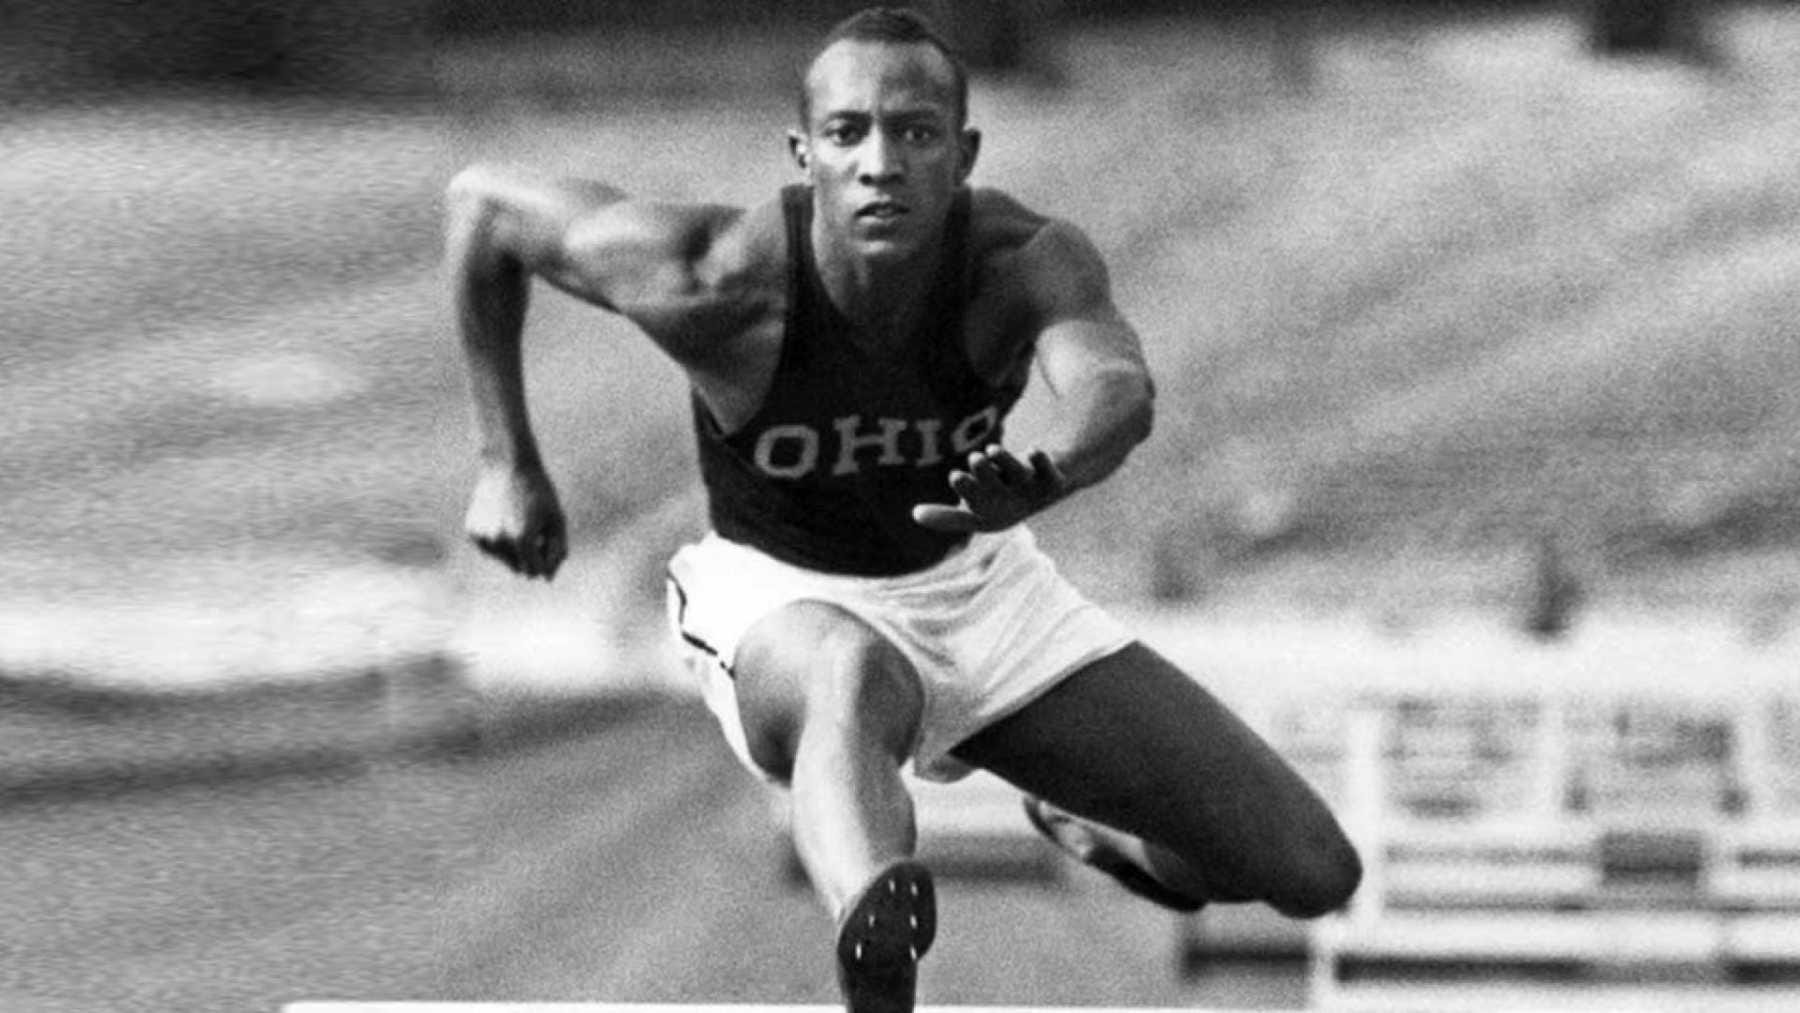 Jesse Owens: The man who humiliated both Hitler and the 1936 Olympic Racial Hierarchy